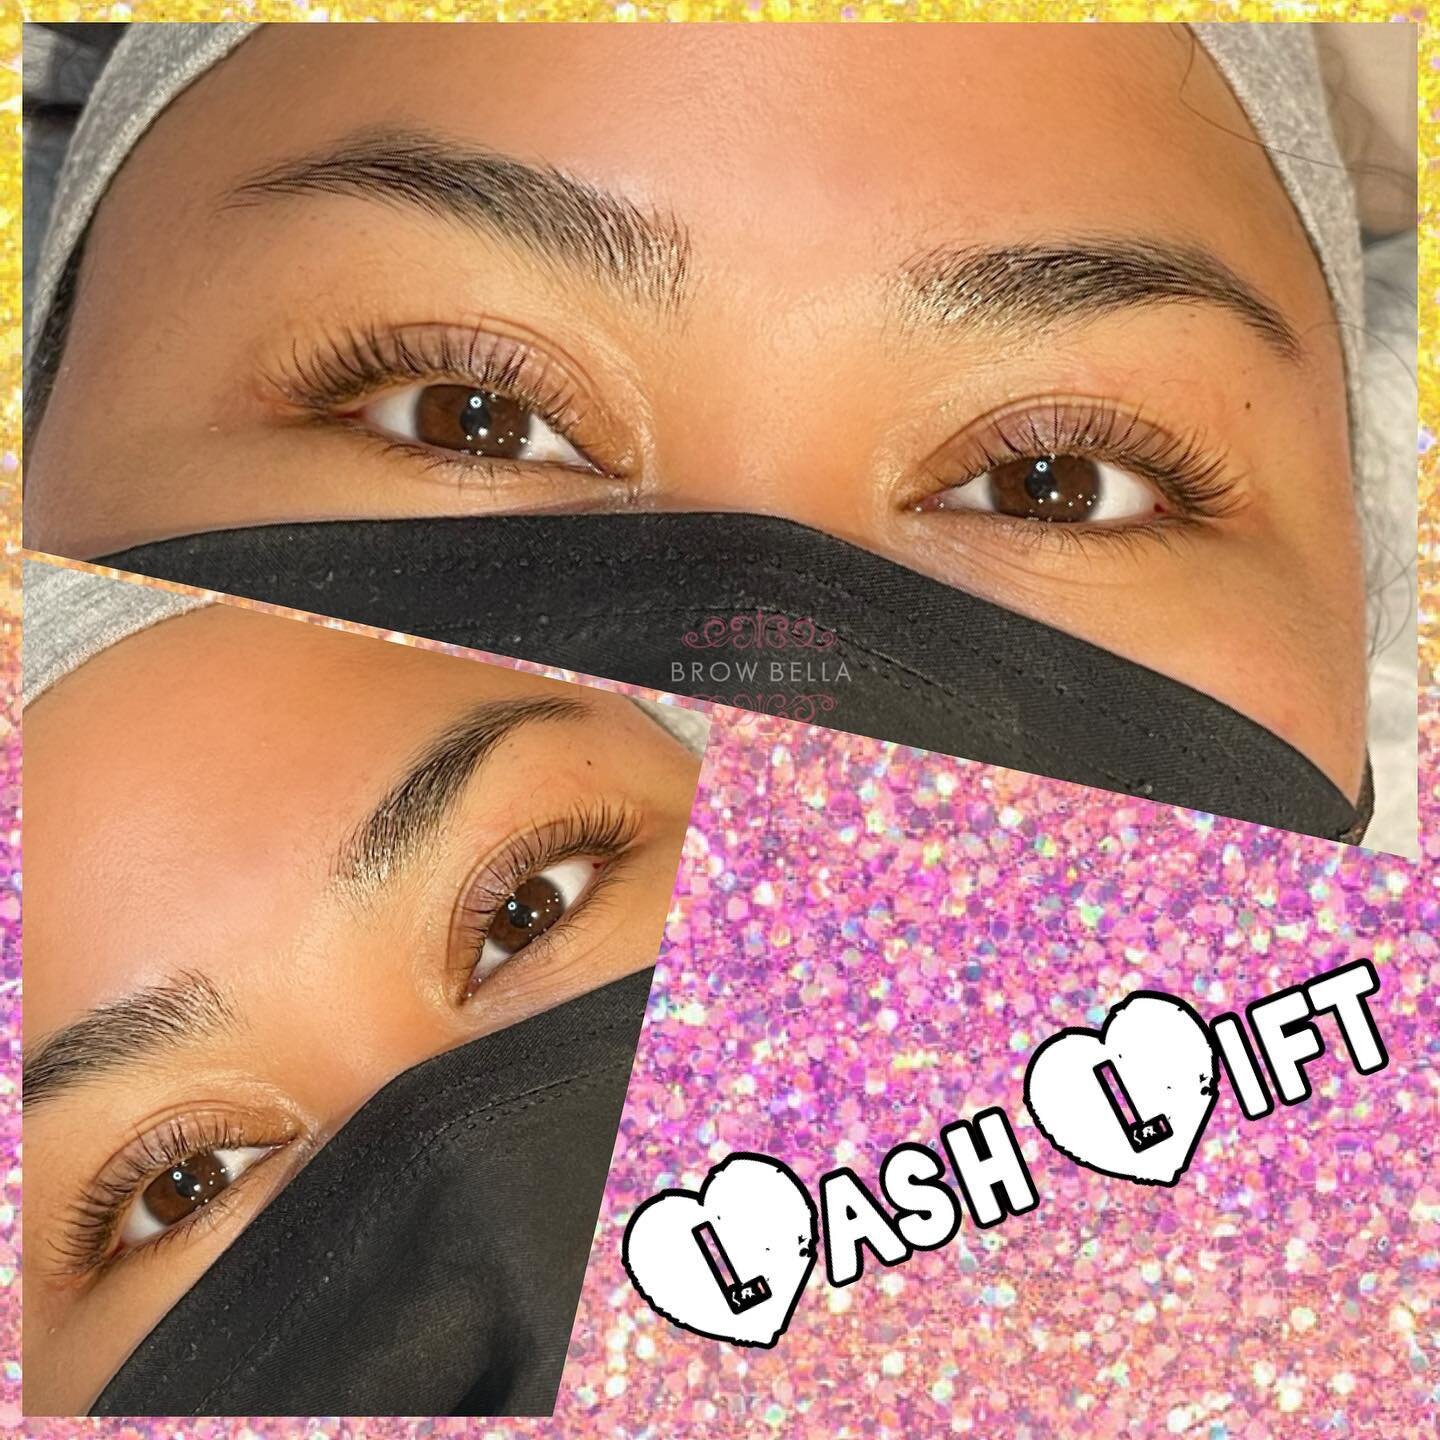 I heart a good Lash Lift+Tint 💖💛🖤The way it highlights those honey eyes too!🤩🍯
&bull;This one was done by our artist Kassy. 
&bull;The service lifts and fans out your natural lashes and gives this beautiful defined look to the eyes for 6-8 weeks